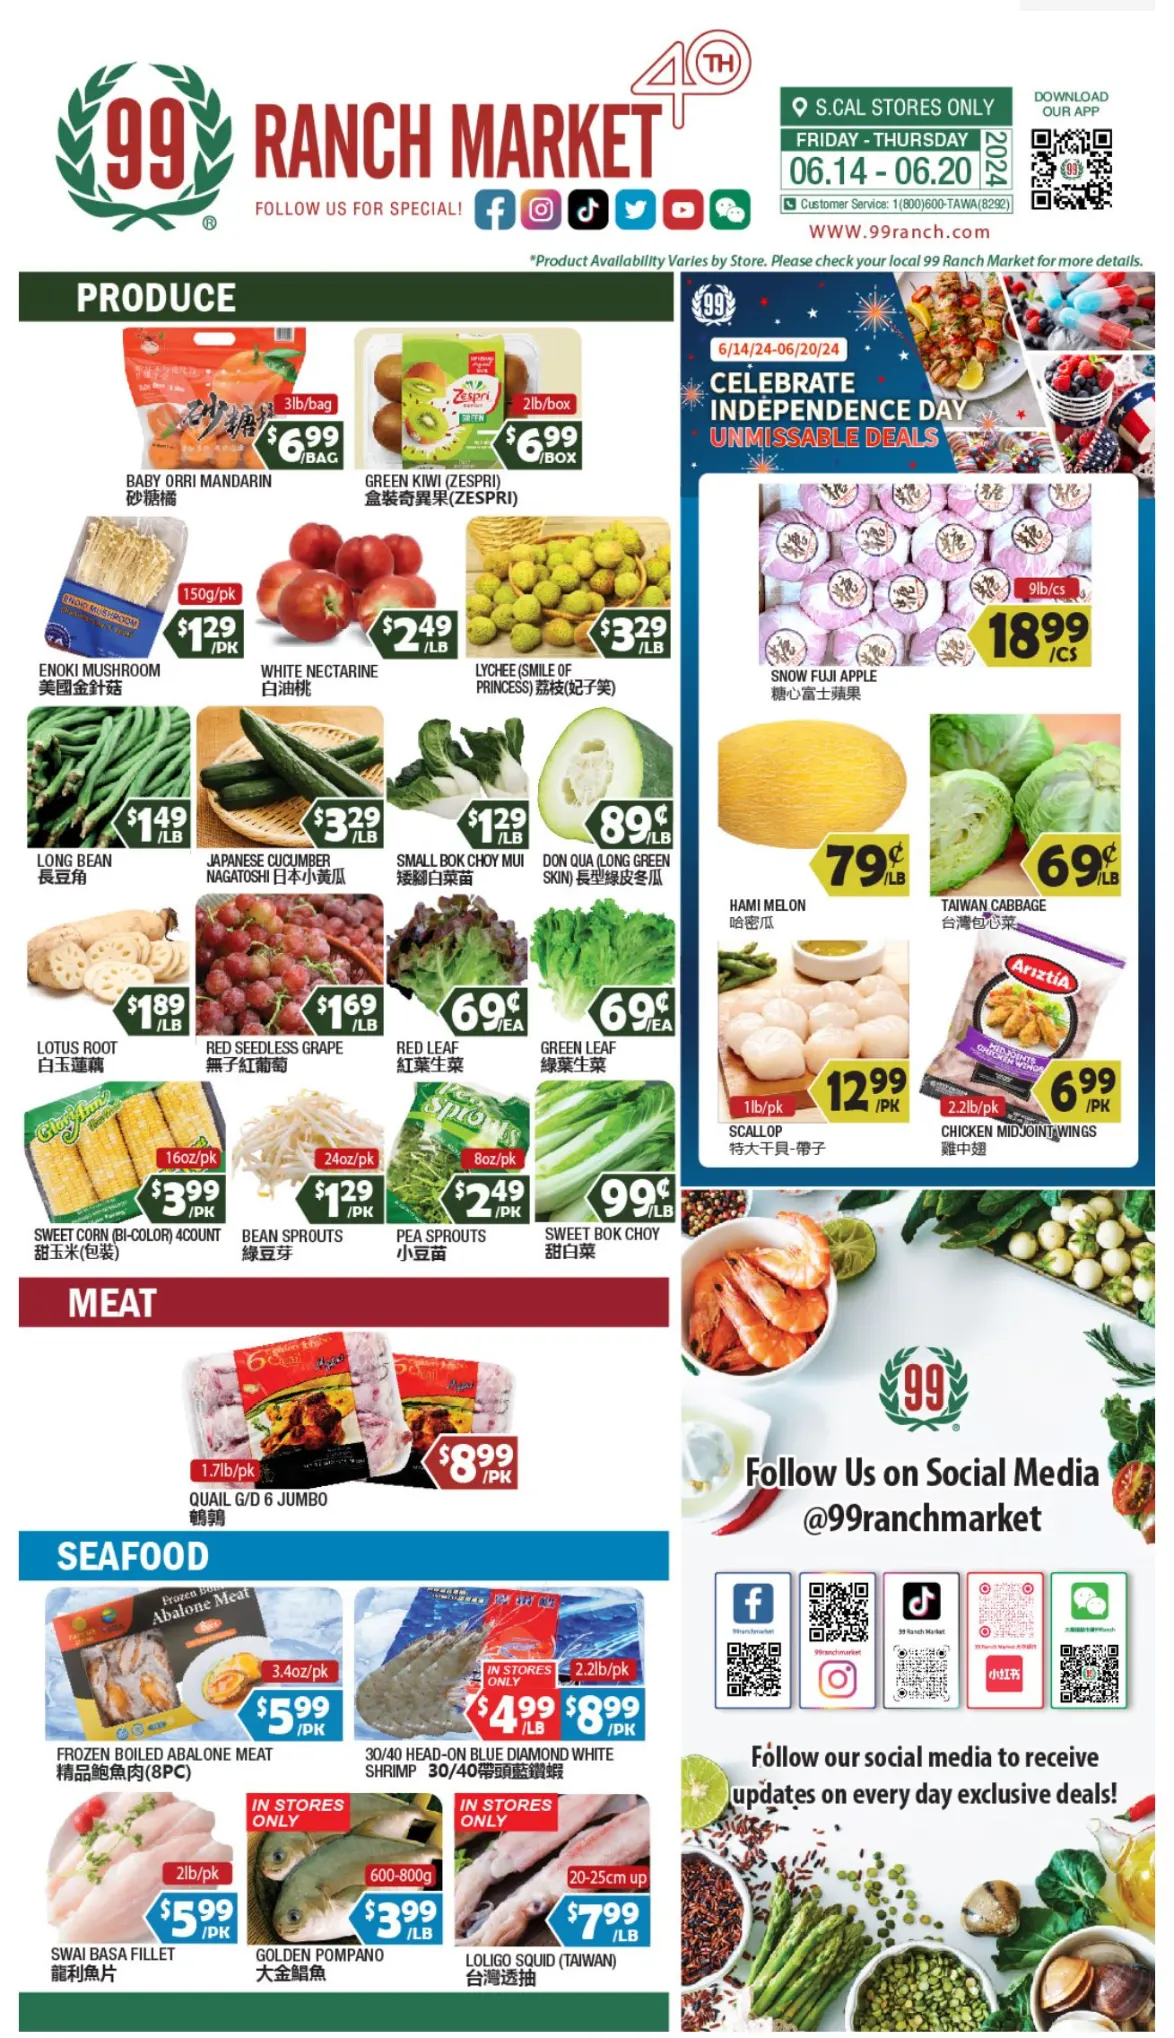 99 Ranch Market Weekly Ad July 2024 Weekly Sales, Deals, Discounts and Digital Coupons.